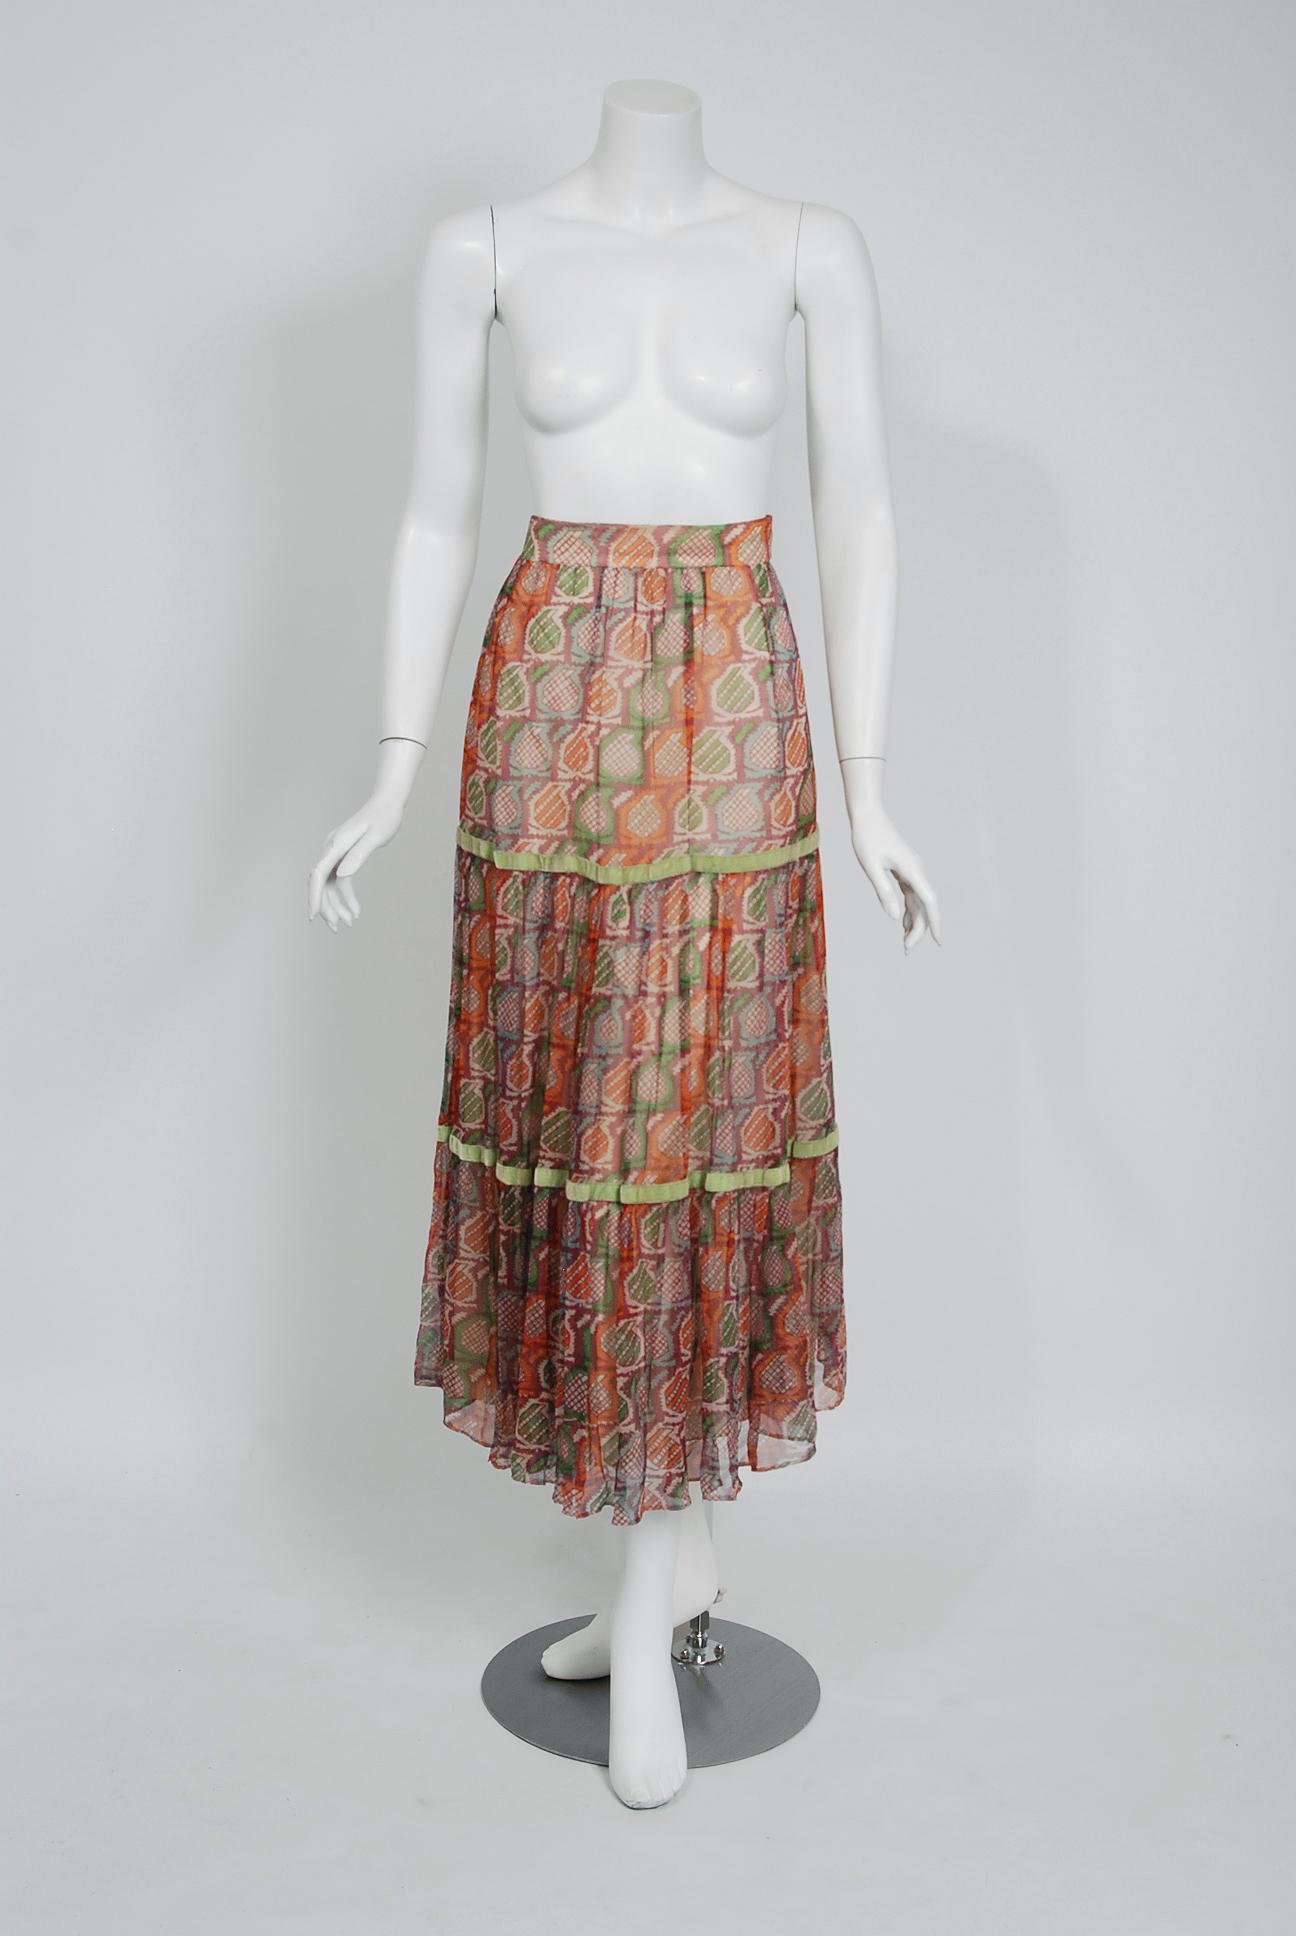 Gorgeous Thea Porter Couture designer skirt fashioned in luxurious multi-colored silk chiffon. Just look at the beautiful bohemian print. I love the nipped waist and detailed green velvet piping. Thea Porter was largely inspired by fashion from